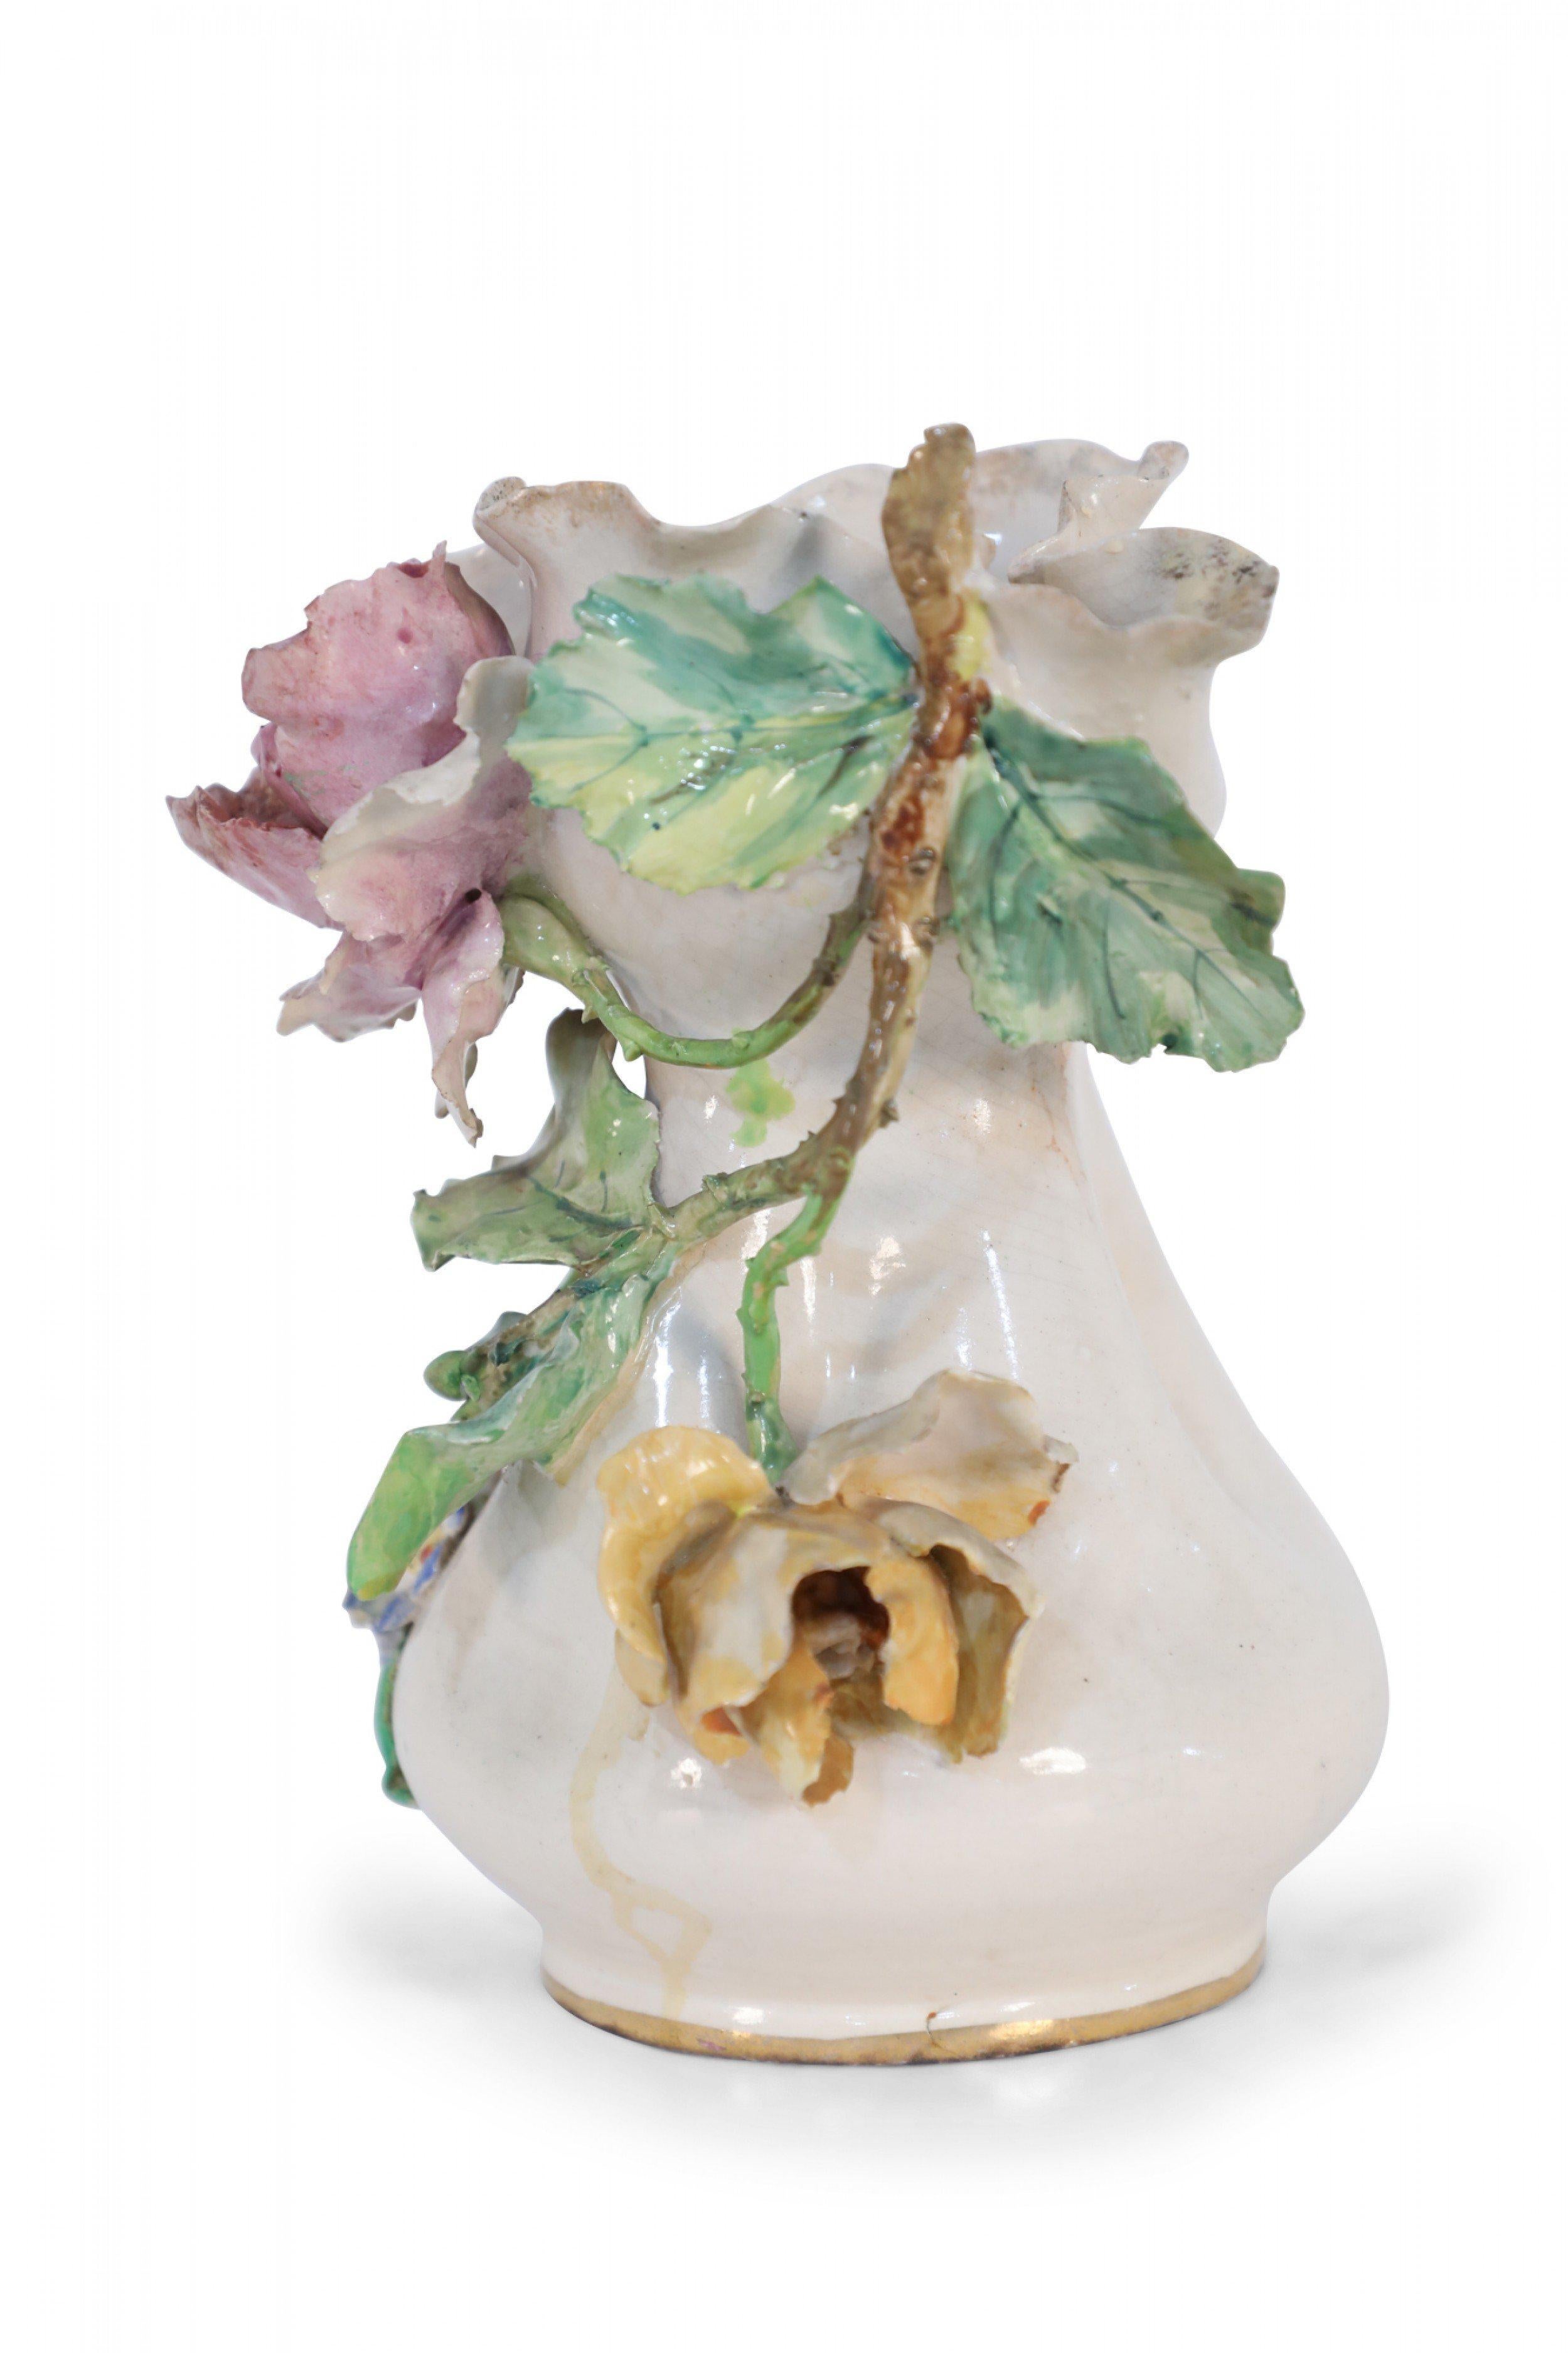 French Victorian cream porcelain vase covered on one side in sculptural, three-dimensional pink and yellow roses blooming from stems with green leaves, alongside blue and yellow pansies, sweeping up to the organically shaped mouth.